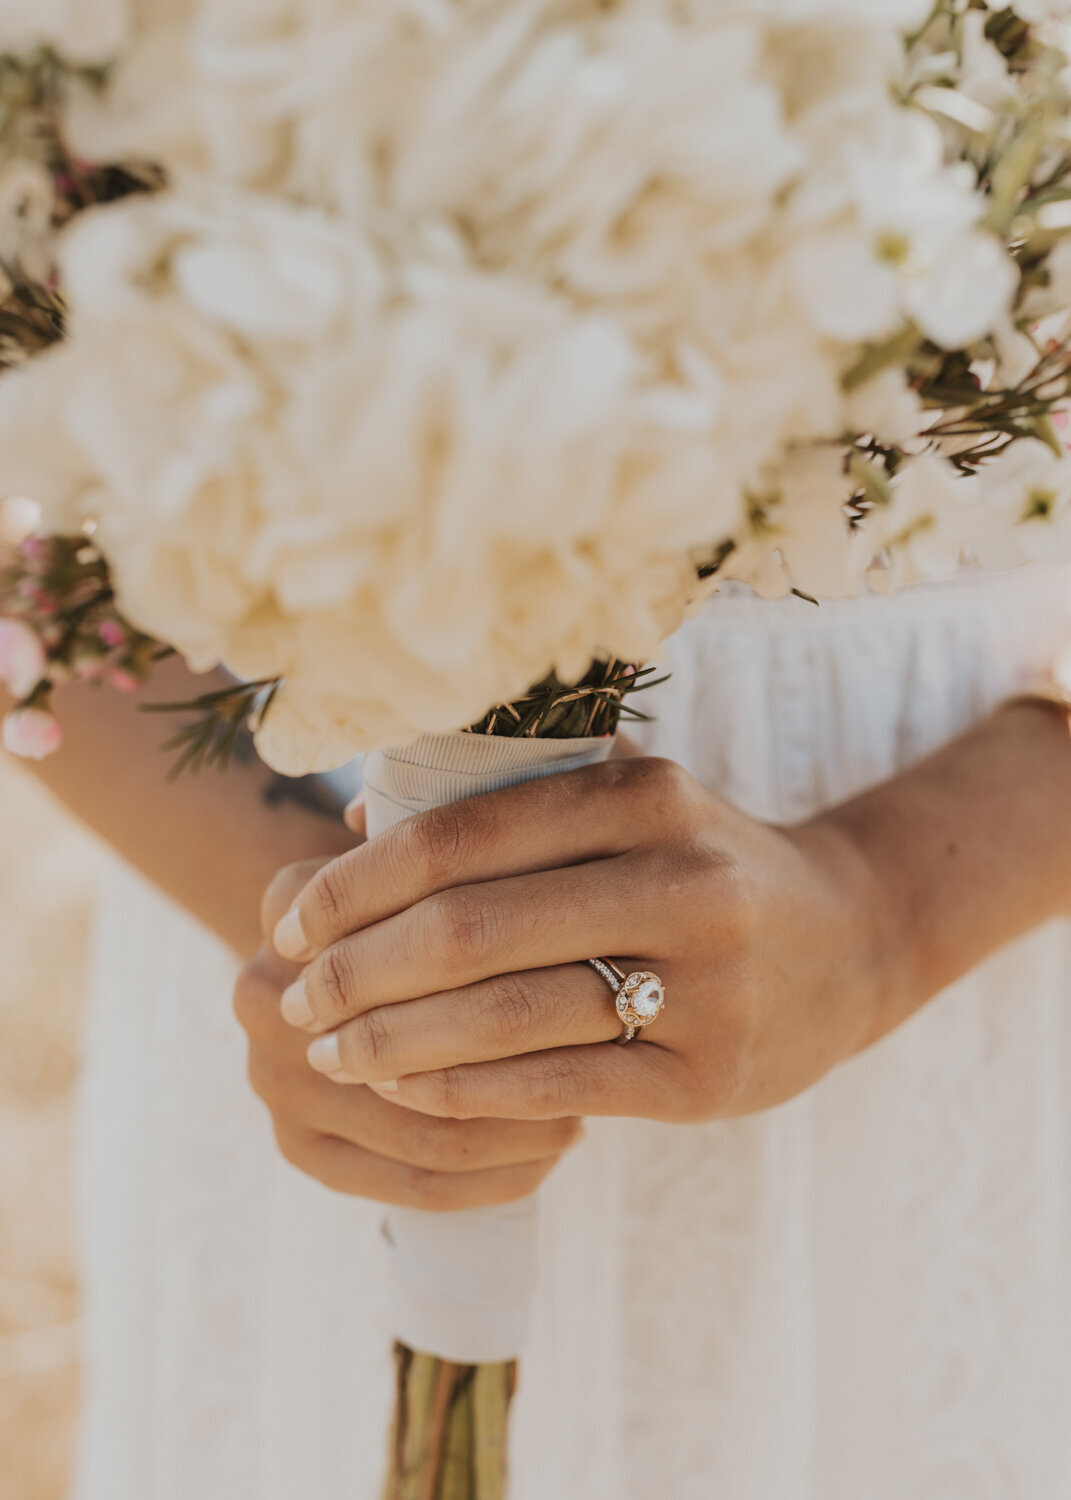 wedding ring on hand holding bouquet